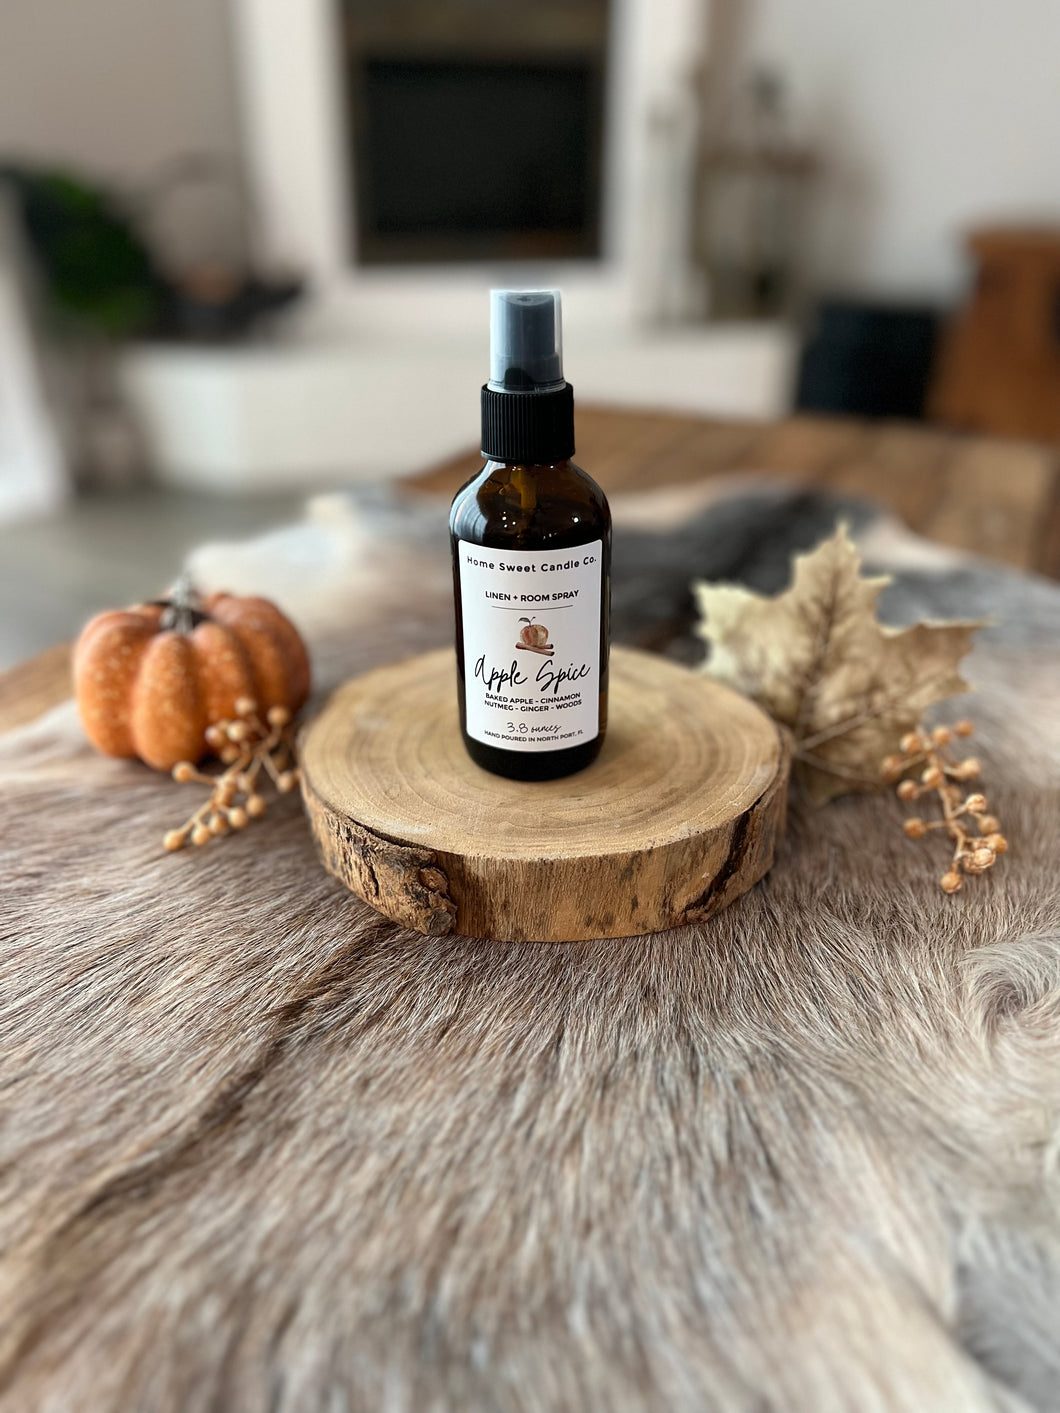 Apple Spice Room Spray - Fall Collection